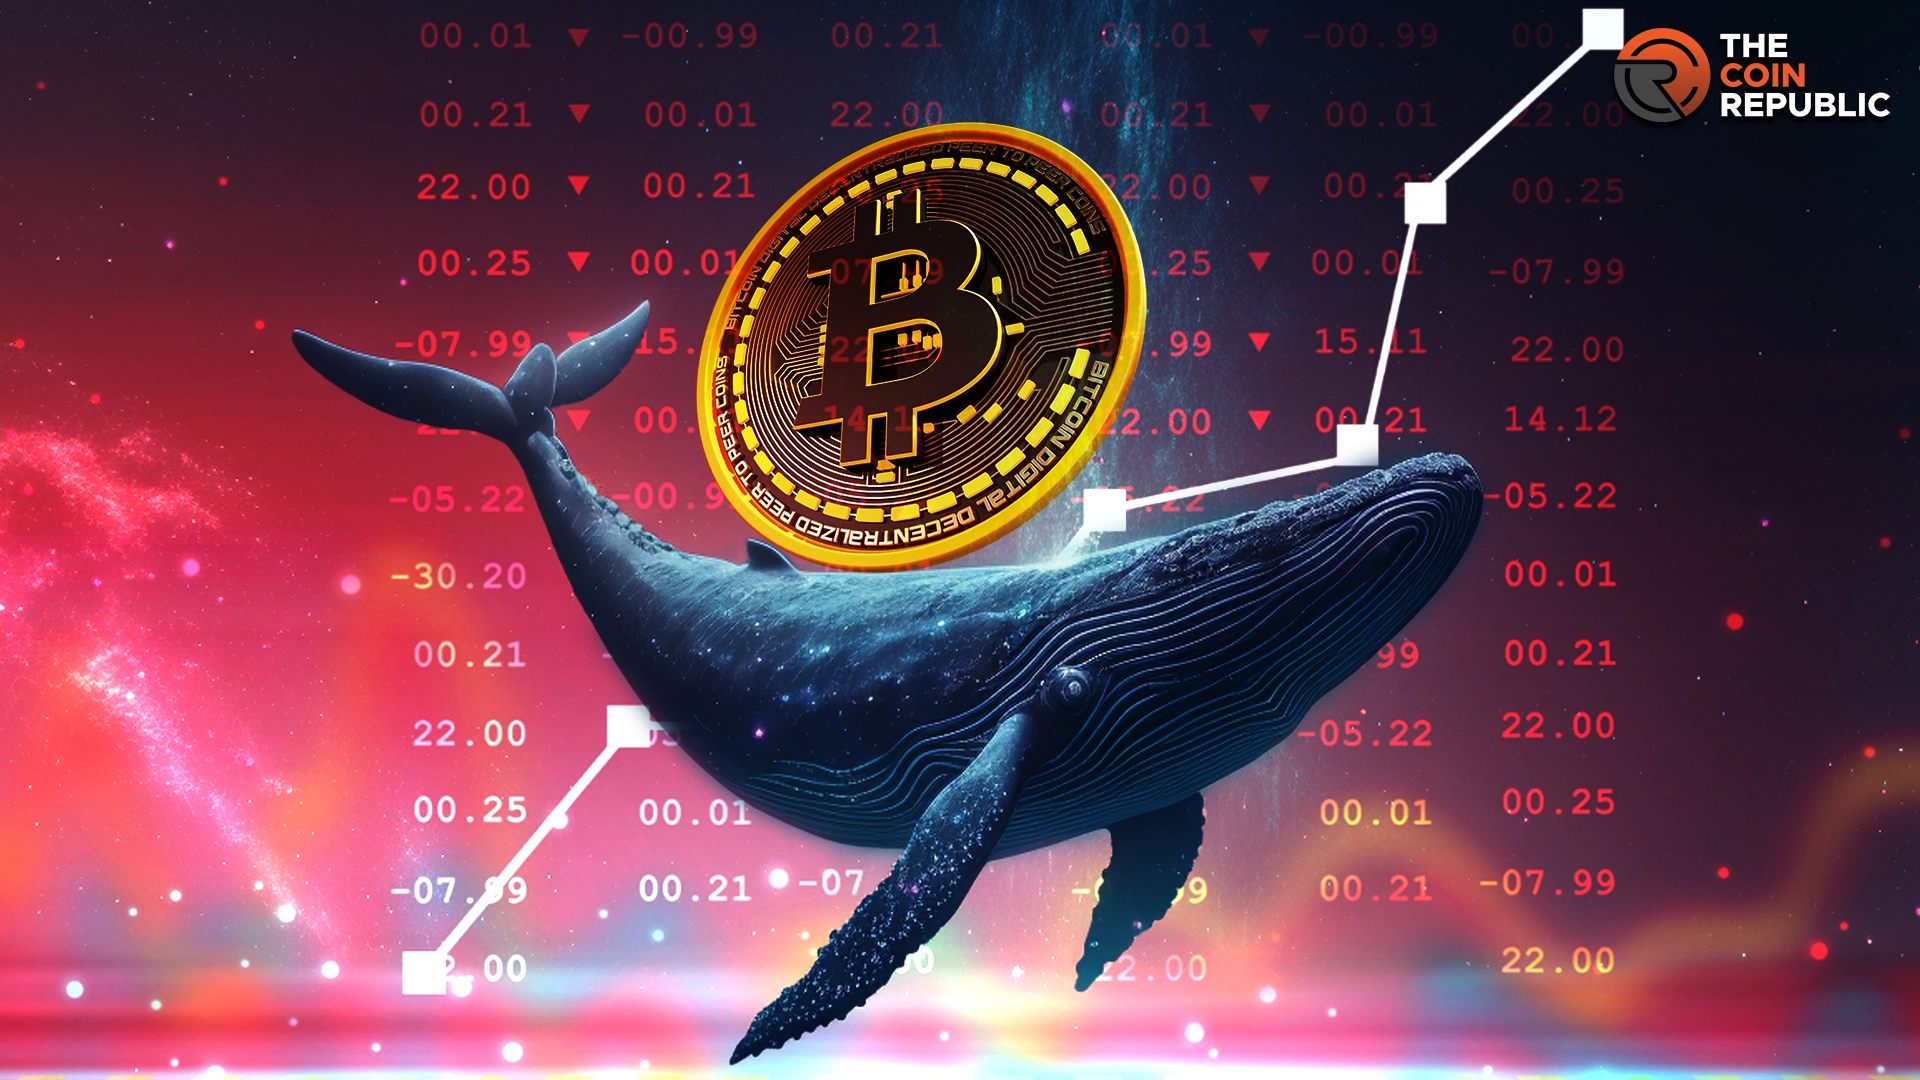 Whale Transfer Frenzy Hits Coinbase, Spurs Market Speculation